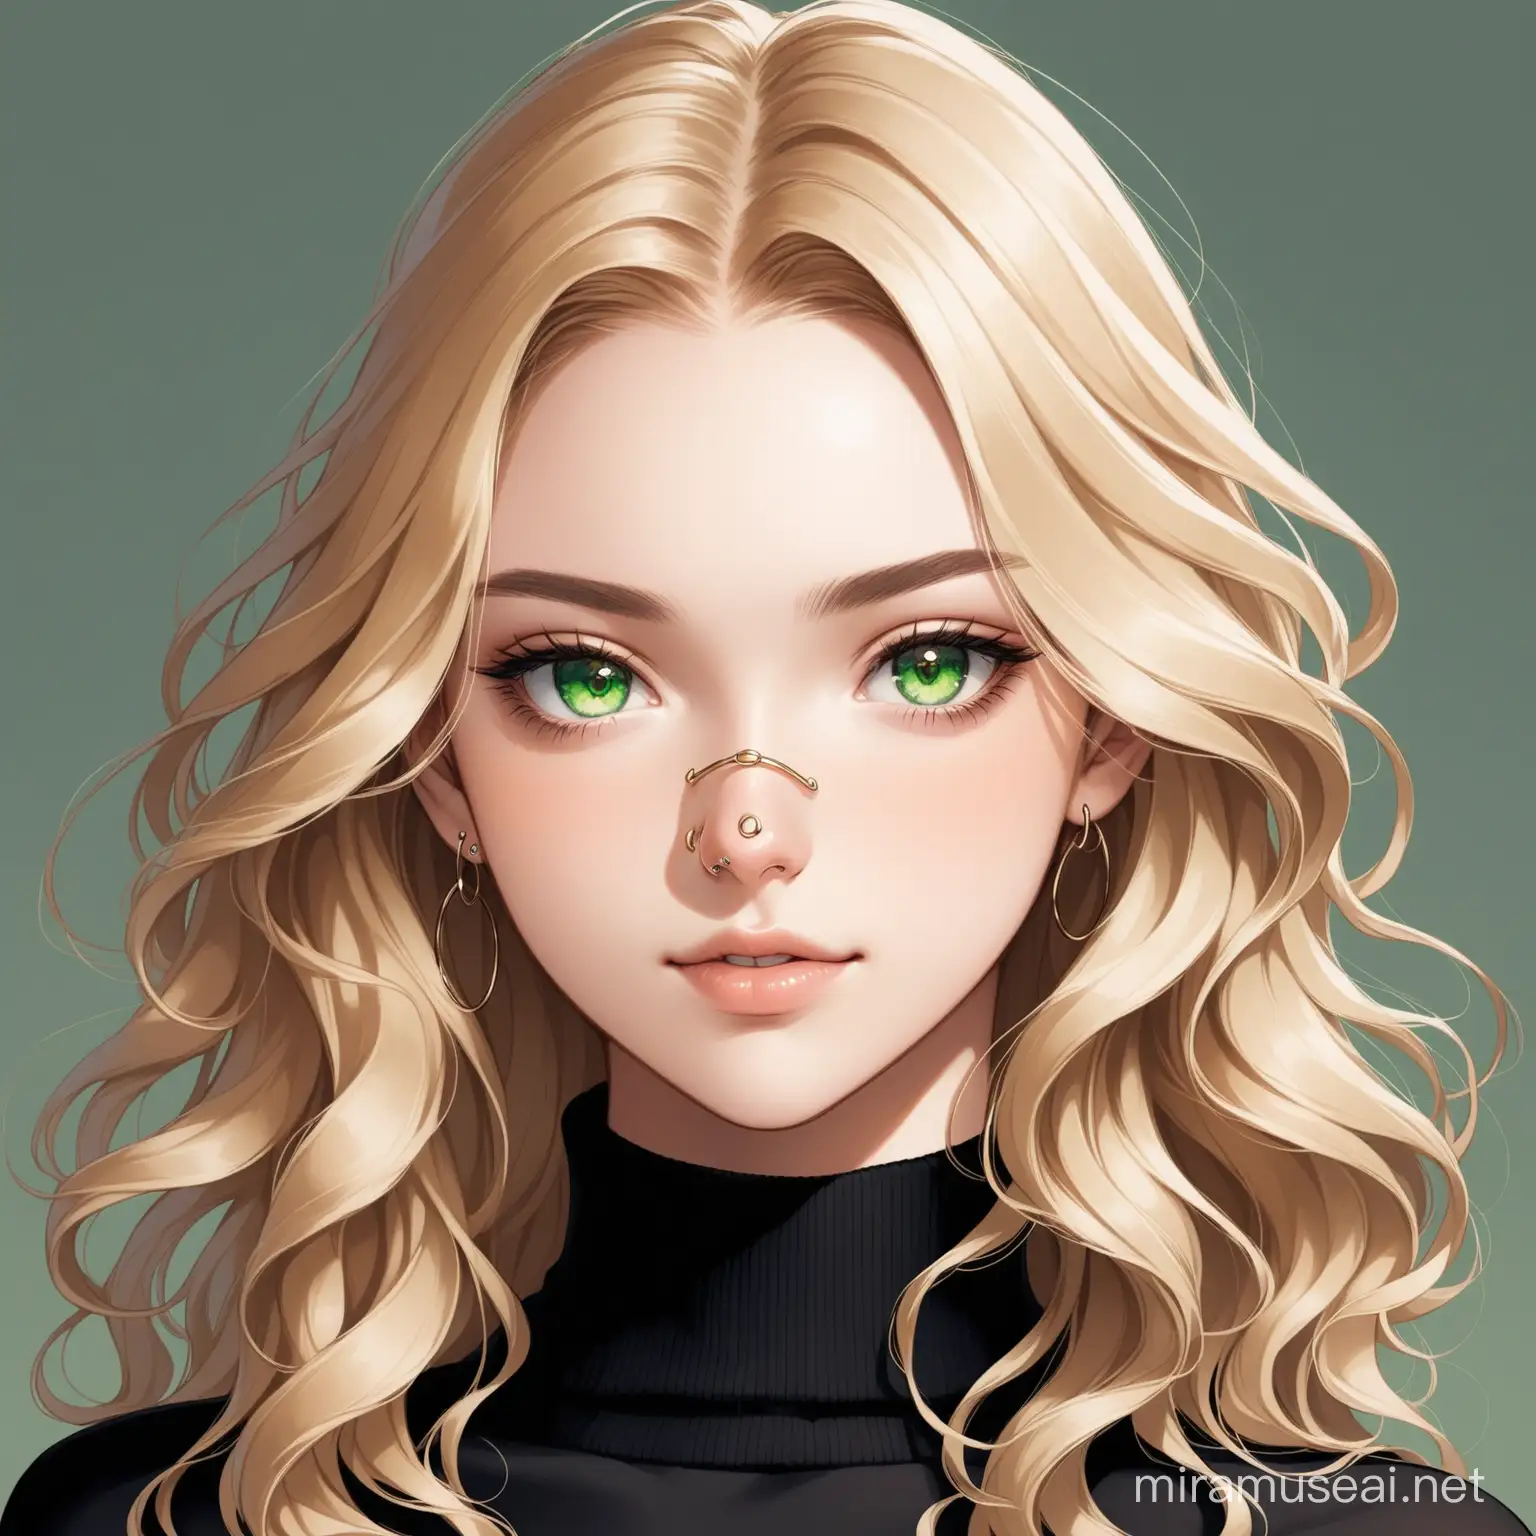 caucasian female around 19 years old with blonde wavy hair, green eyes and a nose ring wearing a black turtleneck wit a plain light background.
